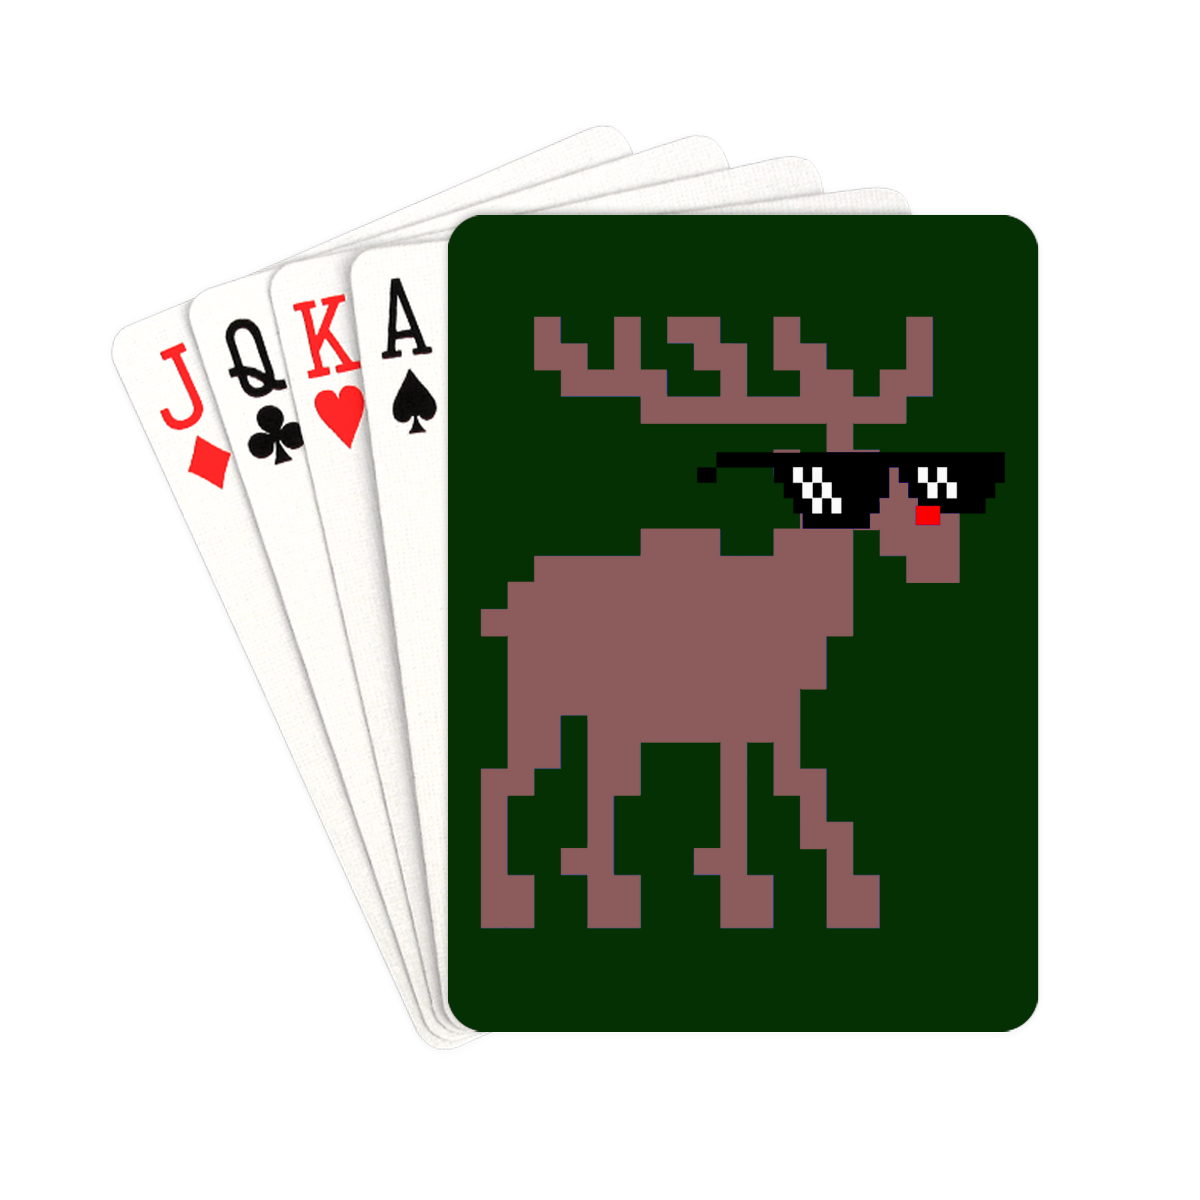 Christmas Ugly Sweater Reindeer (Deal With It) on Green Playing Cards 2.5"x3.5"